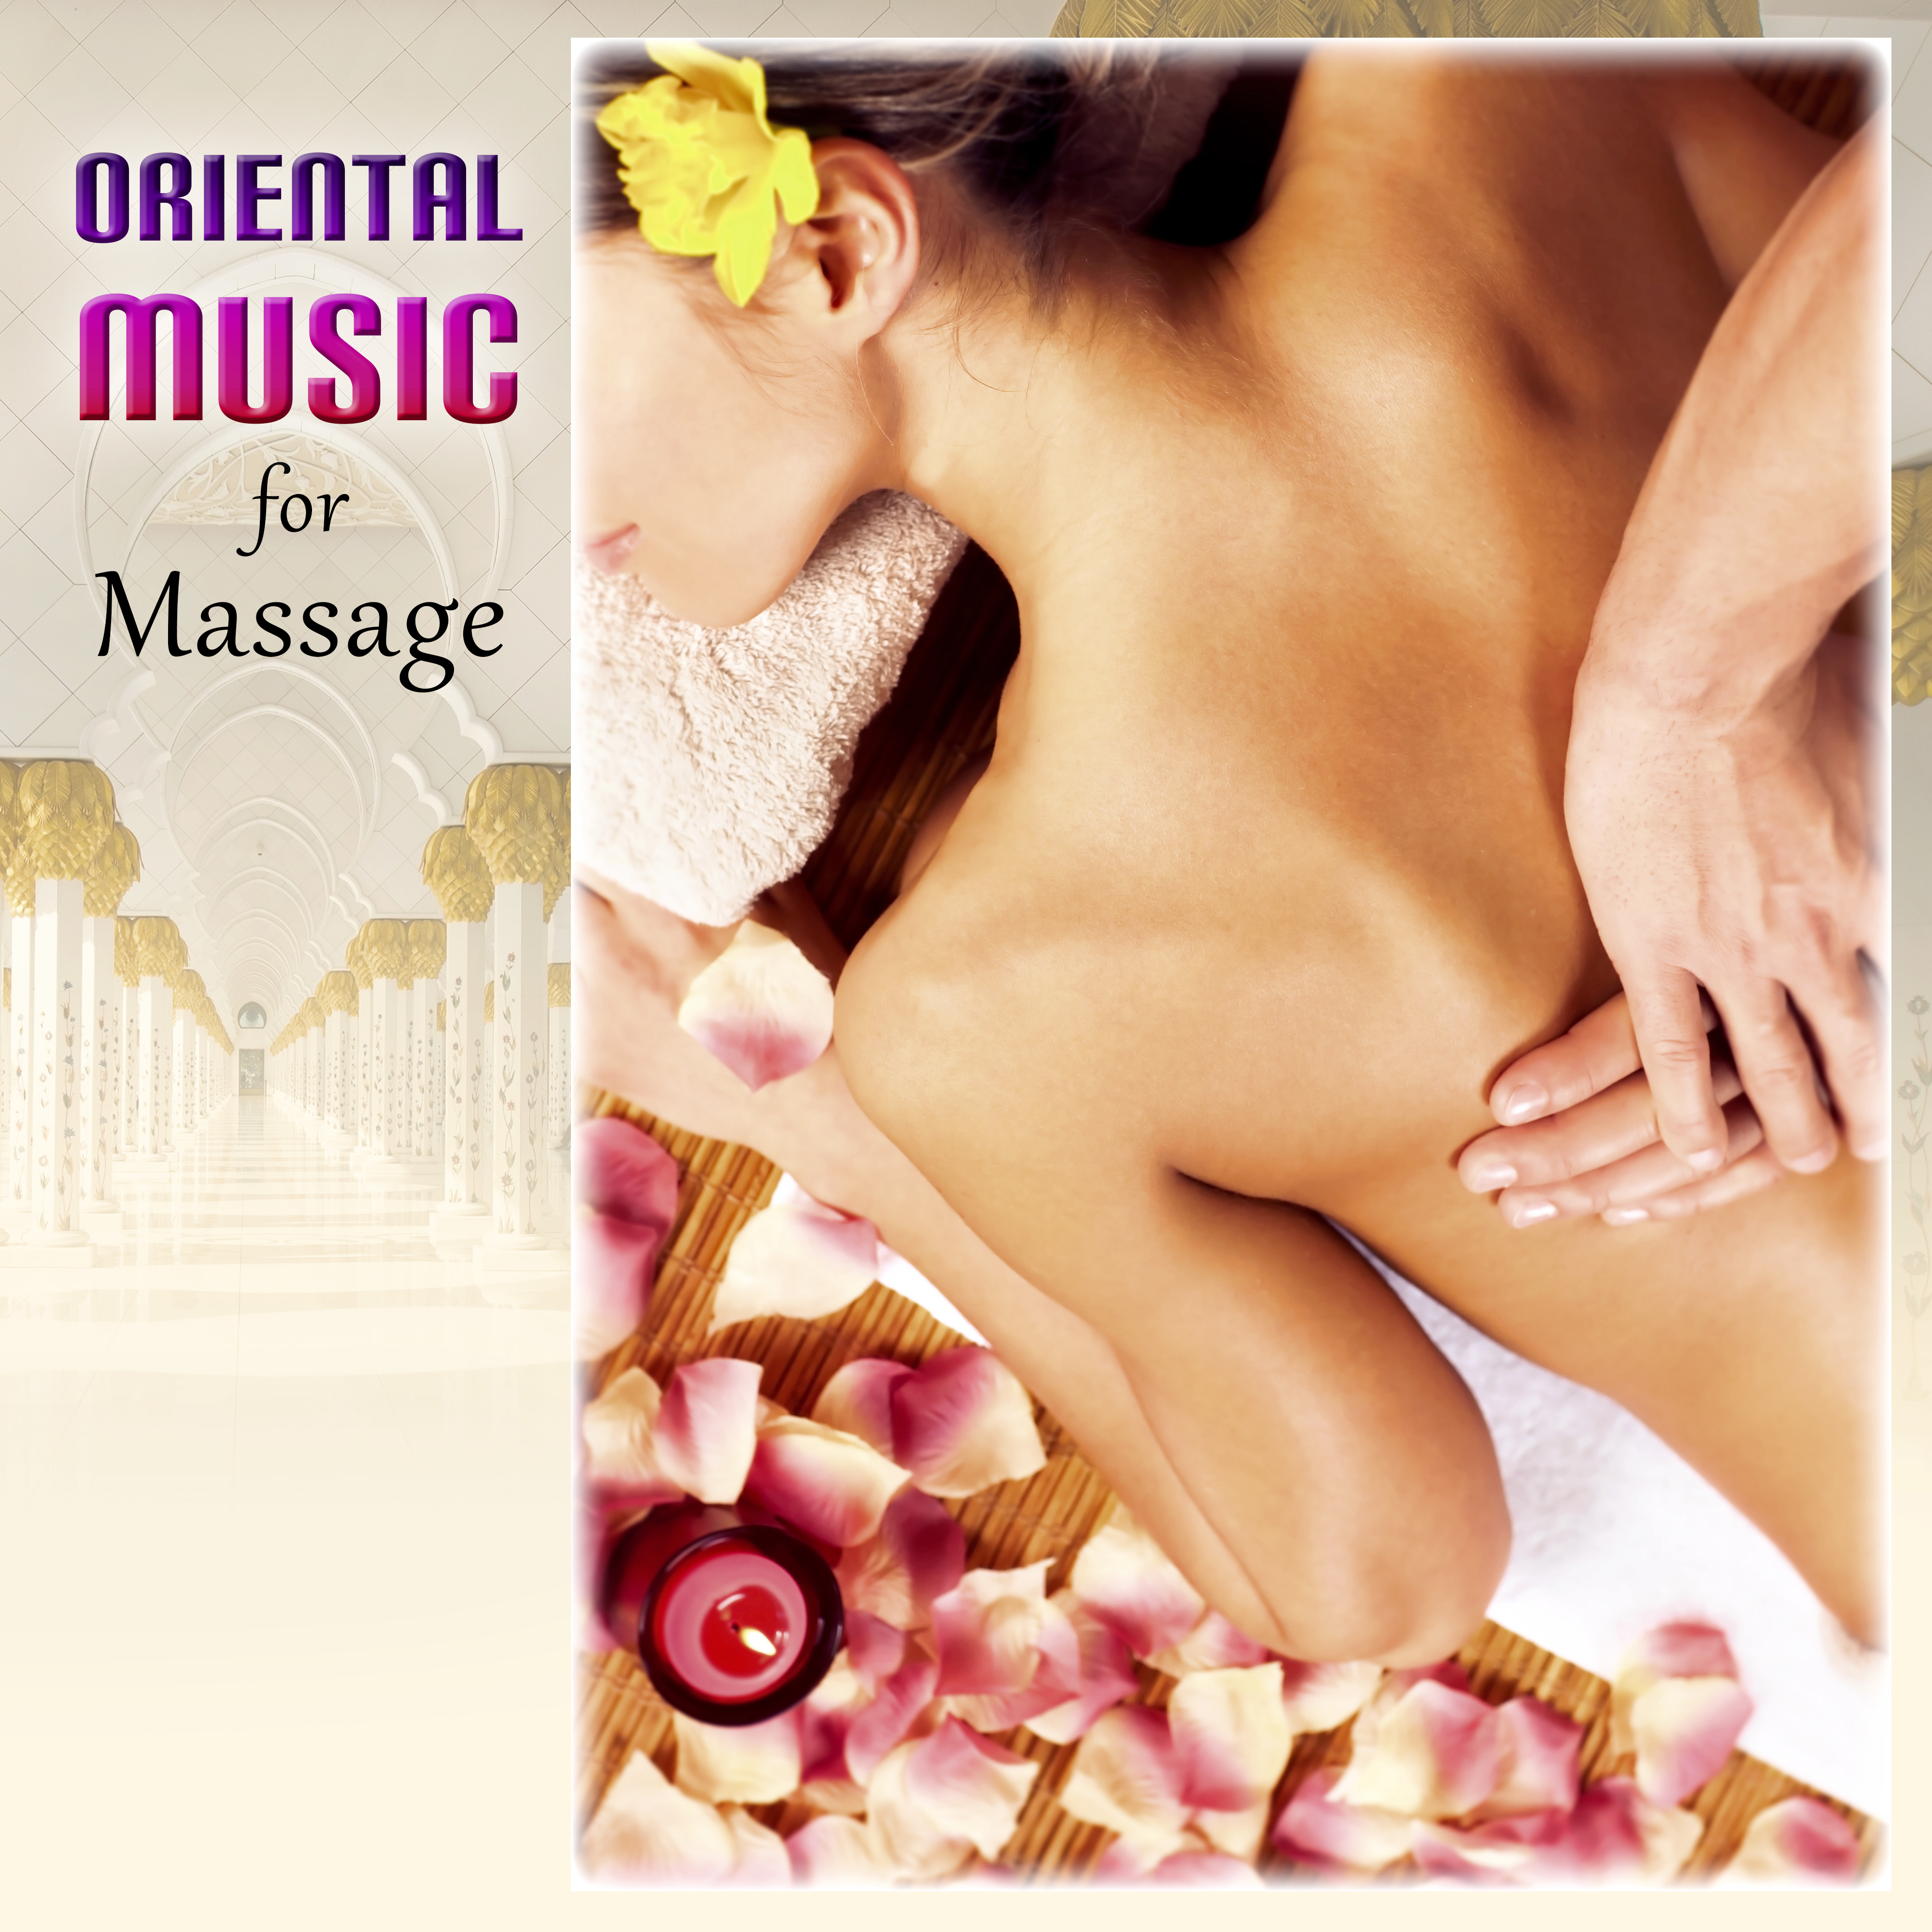 Oriental Music for Massage - Relaxing Music for Well Being, Wellness Spa, Tantric Massage, Reiki